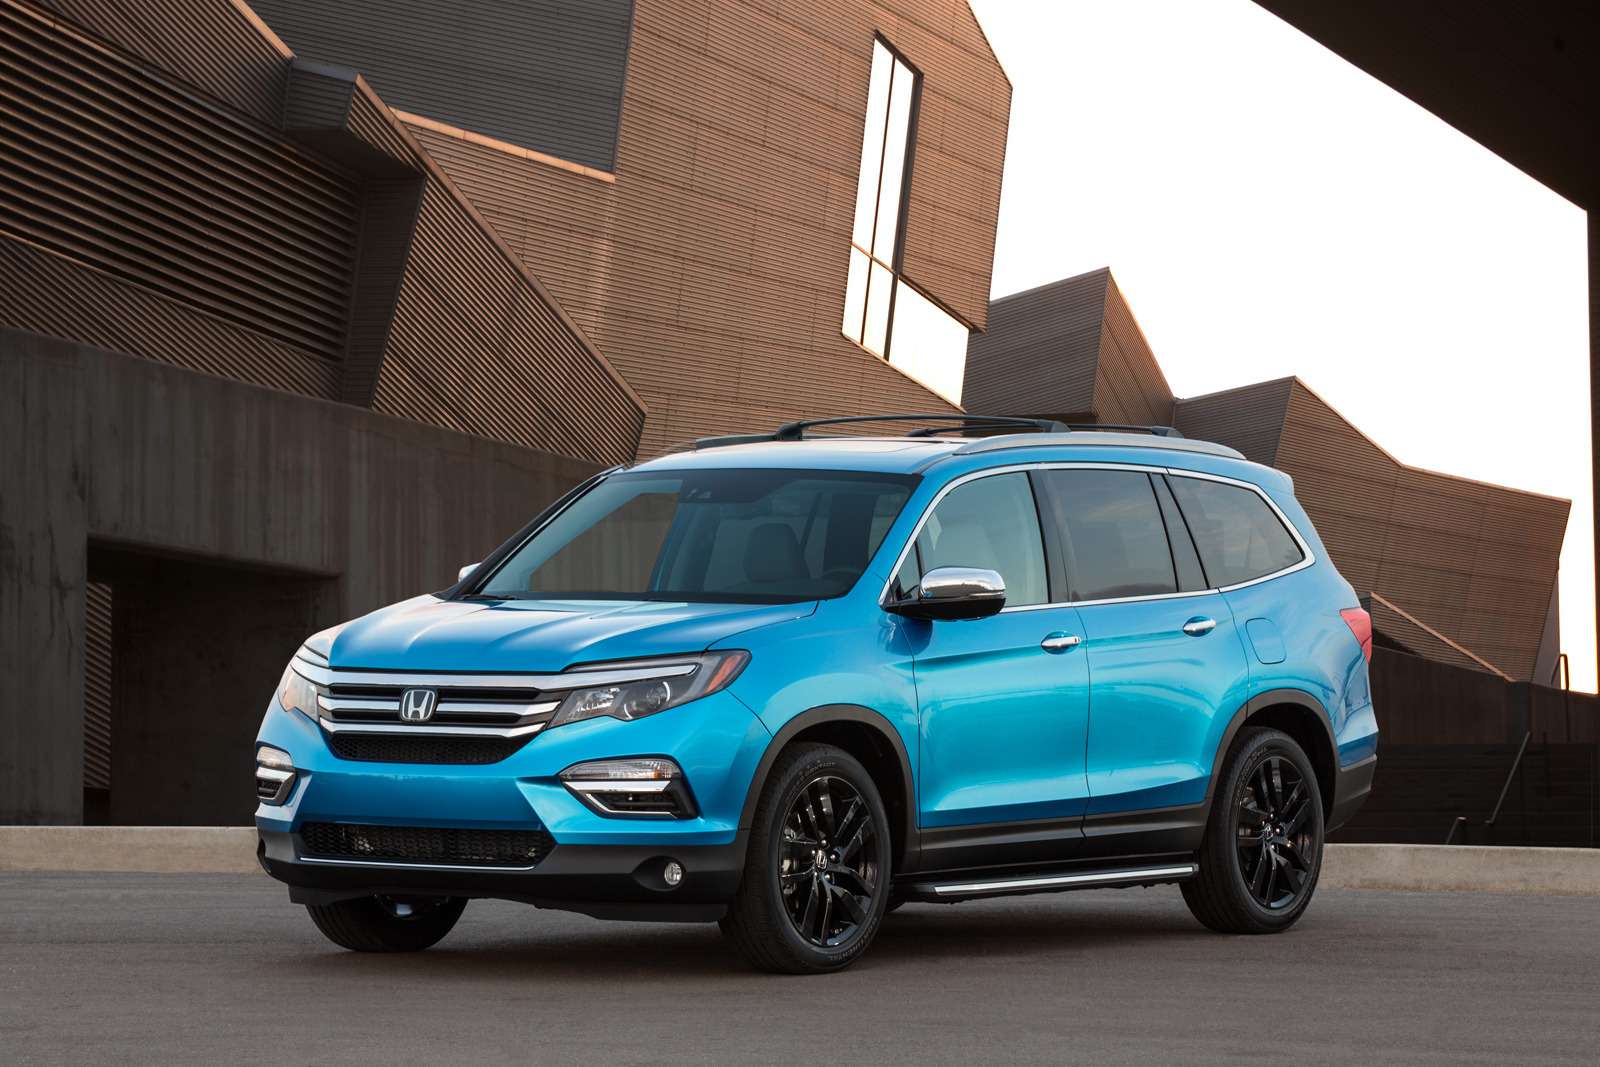 2016 Honda Pilot with accessory package